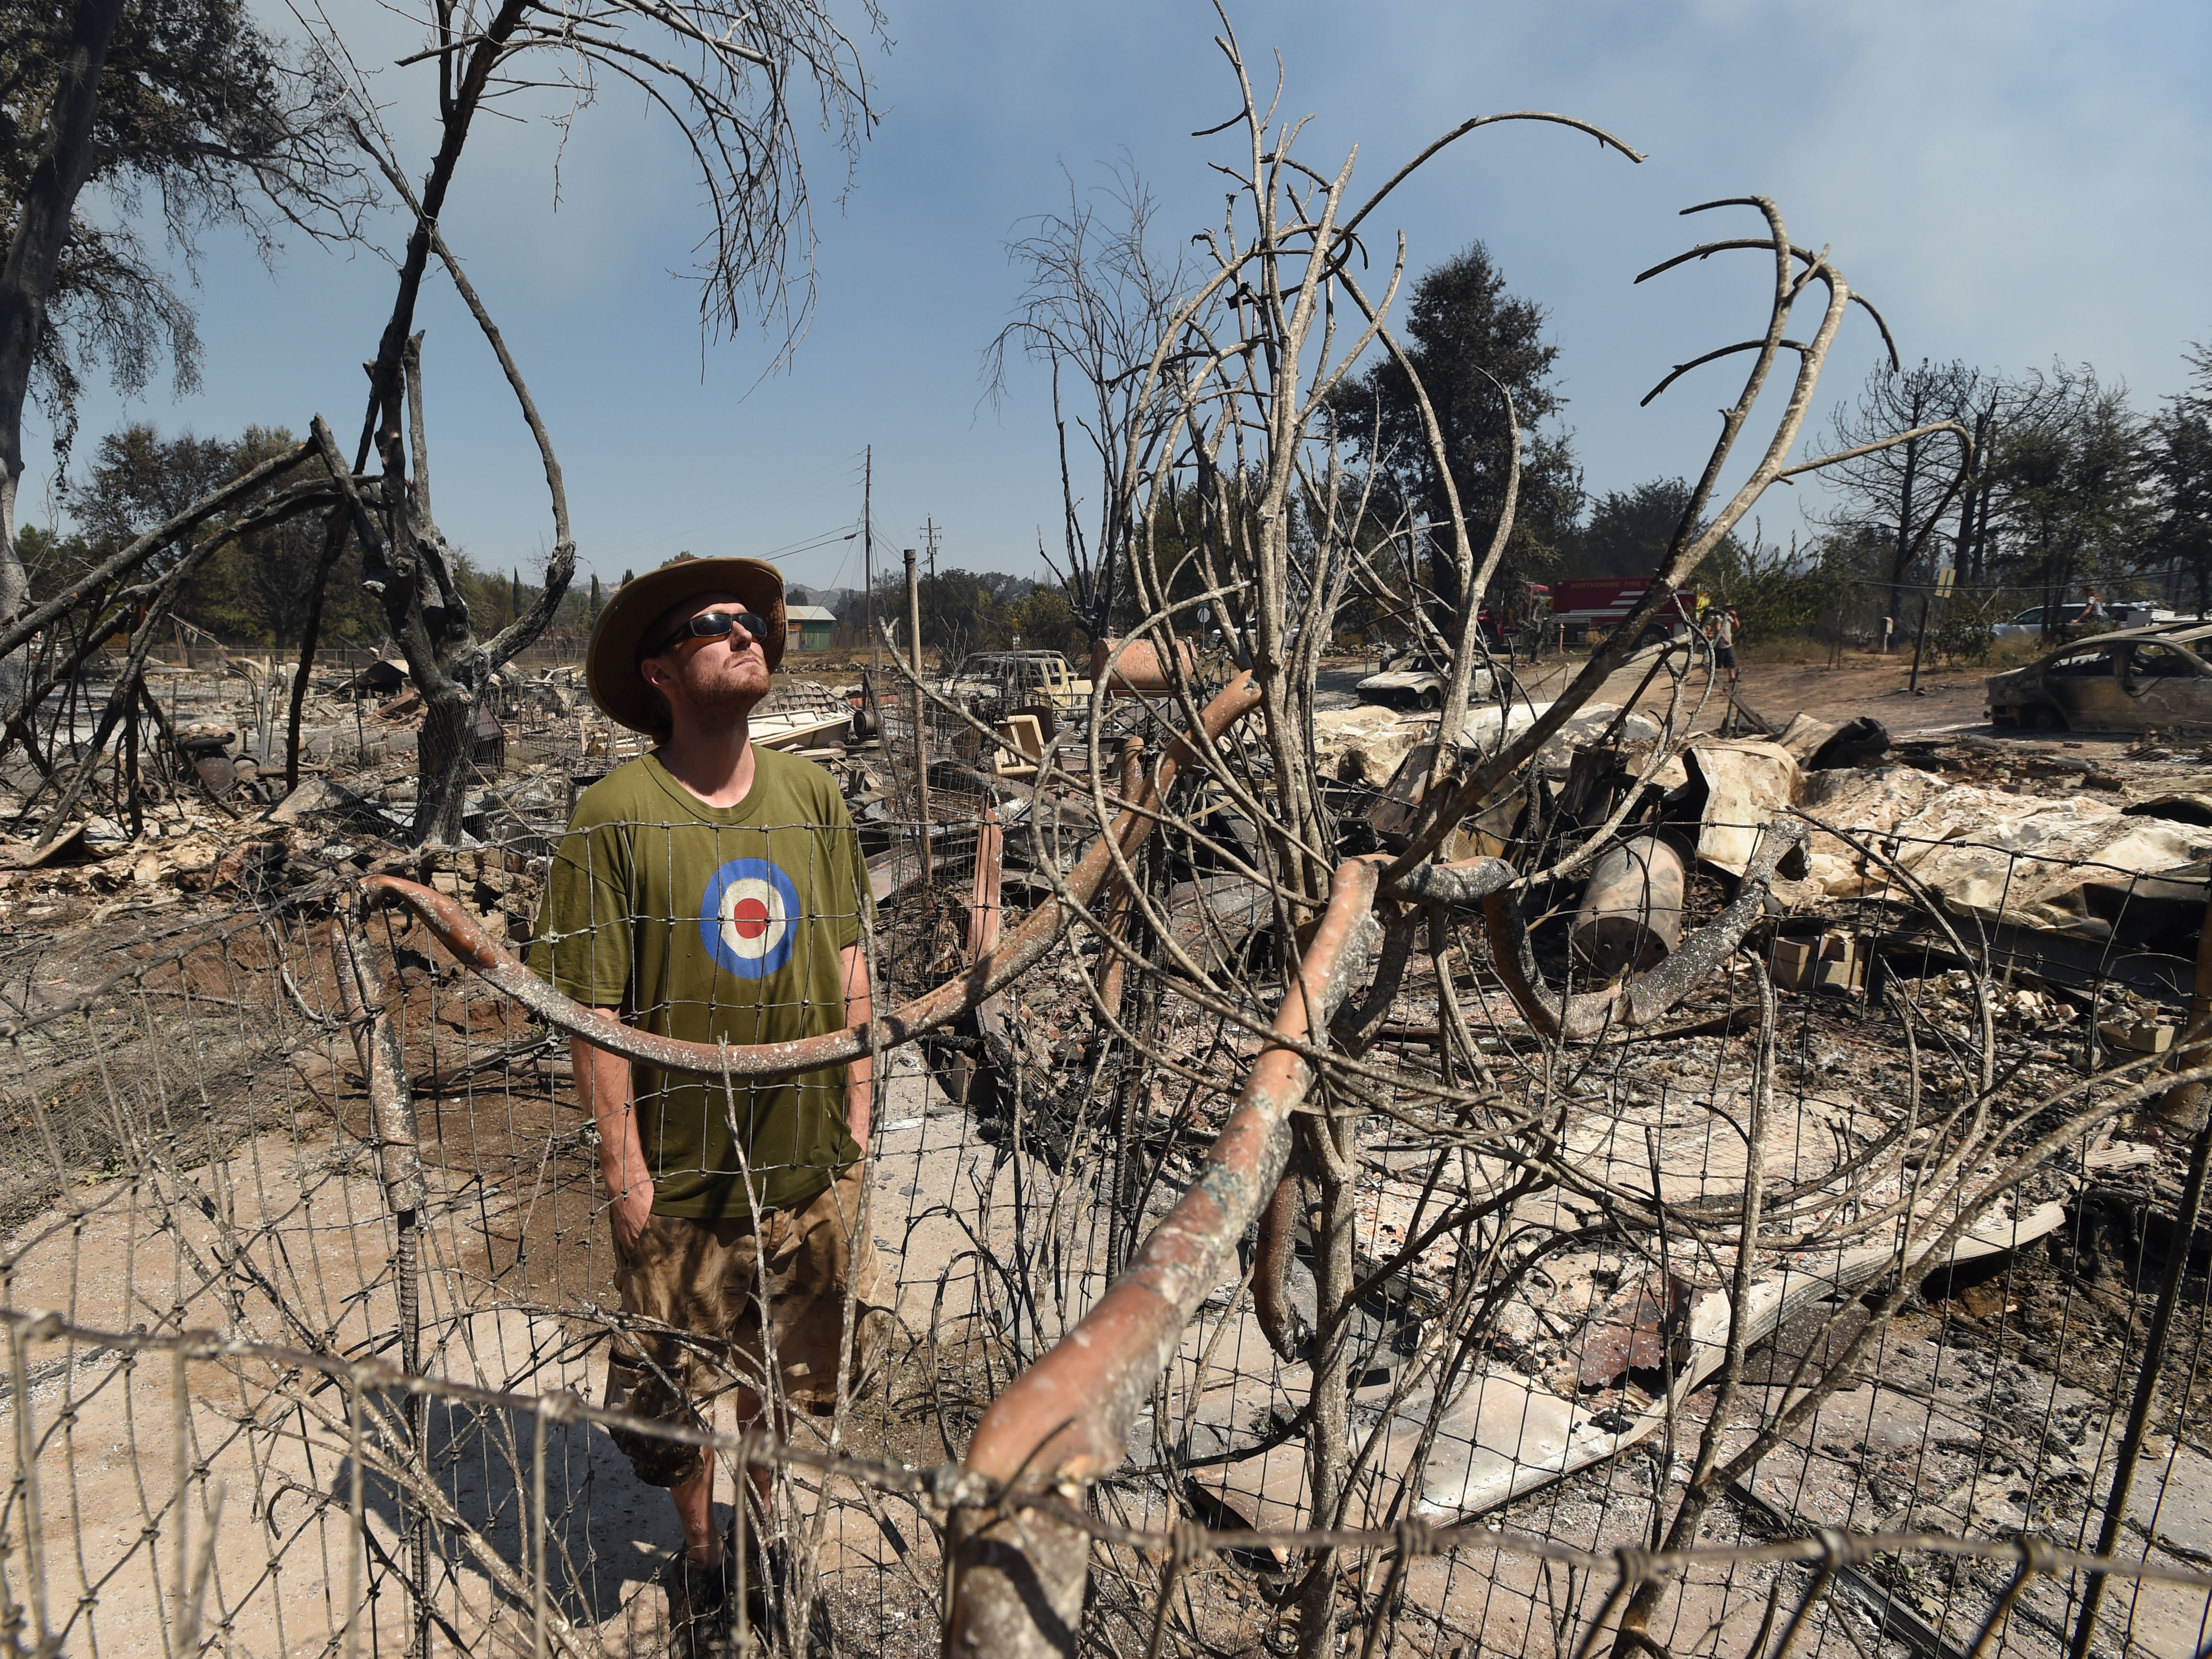 James McCauley looks over the burned-out remains of his residence in the town of Lower Lake, Calif. (Josh Edelson, Associated Press)